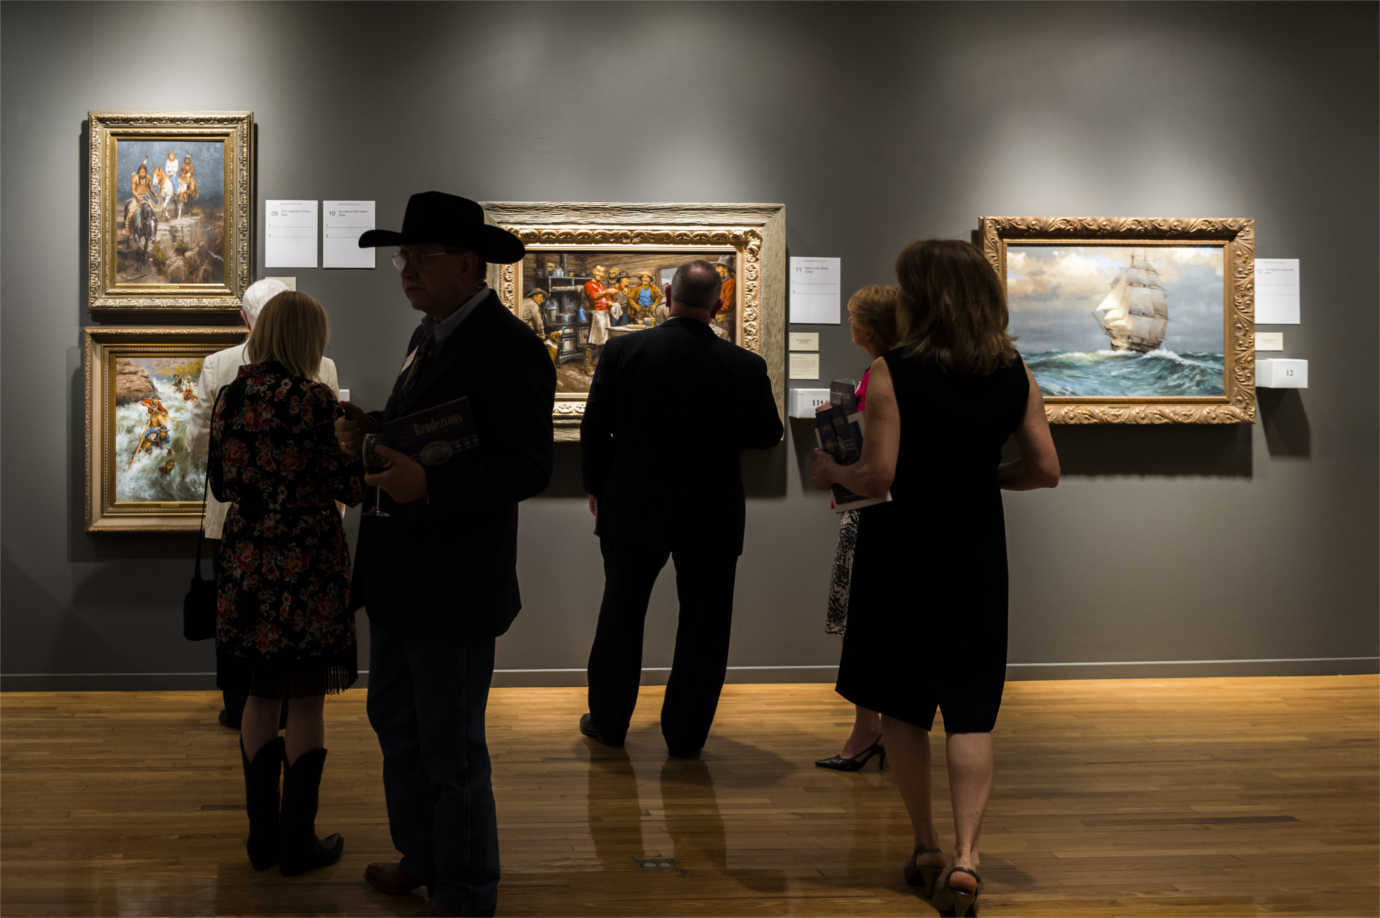 Visitors explore a gallery at the Gilcrease Museum. Image courtesy of the Gilcrease Museum.